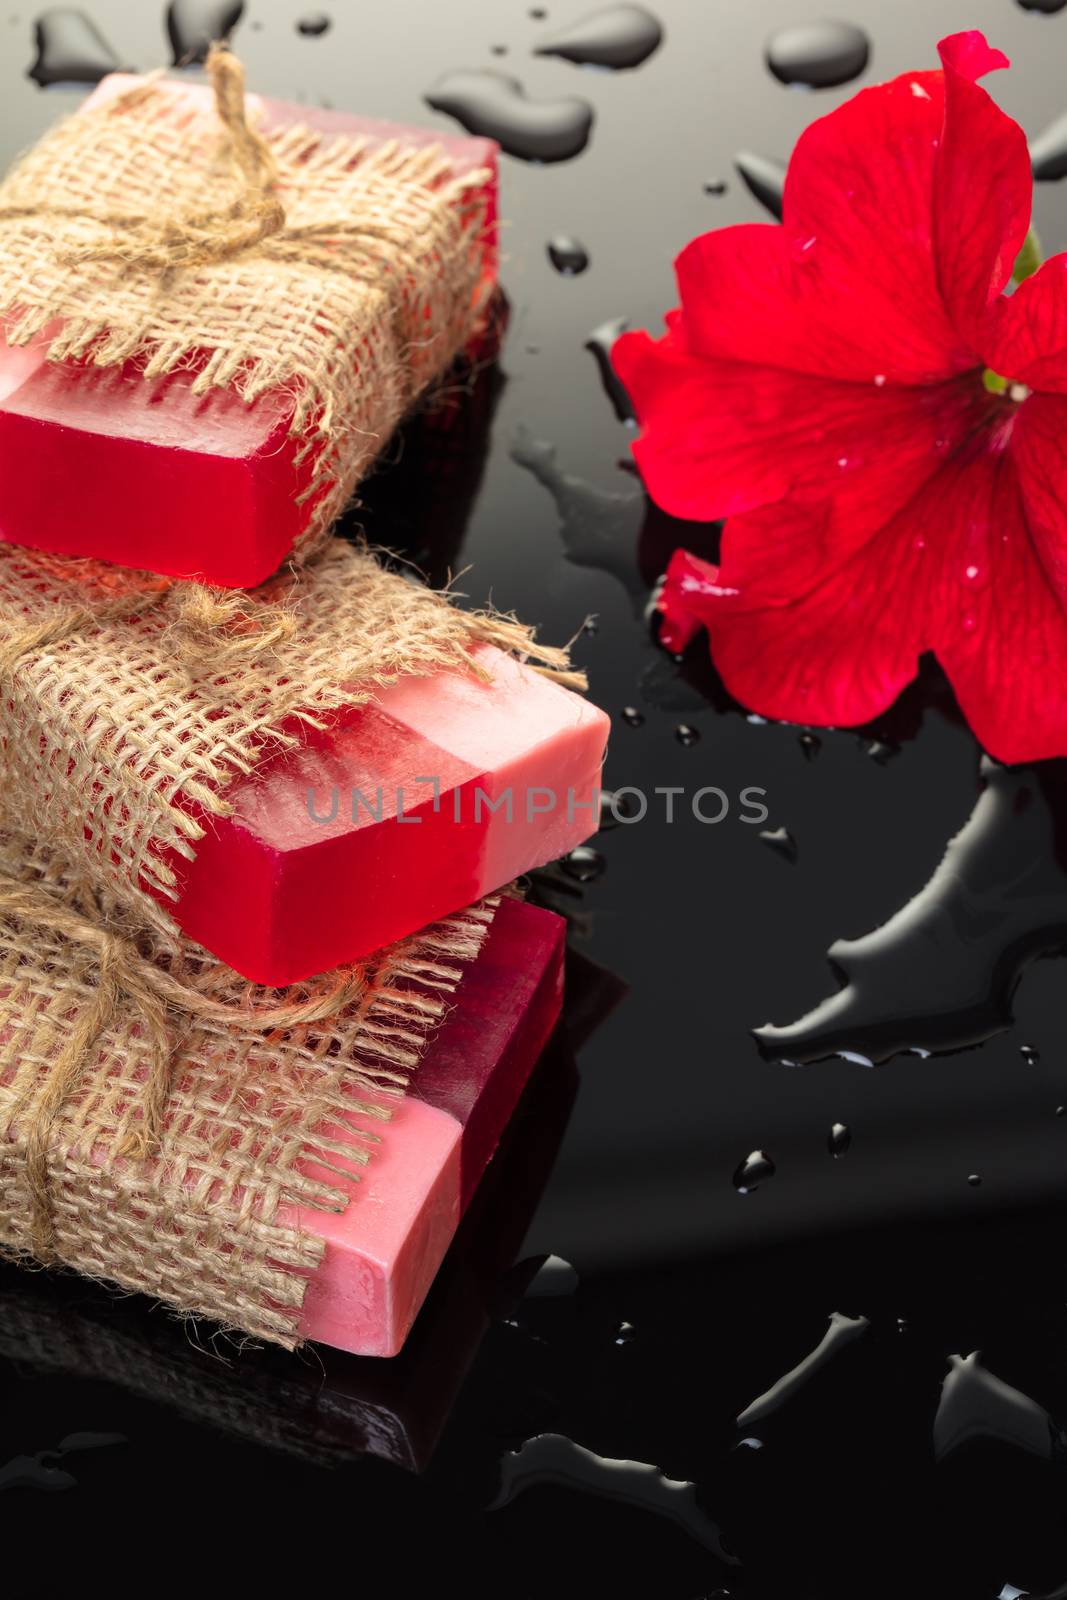 Handmade soap red with a flower petunia on black background